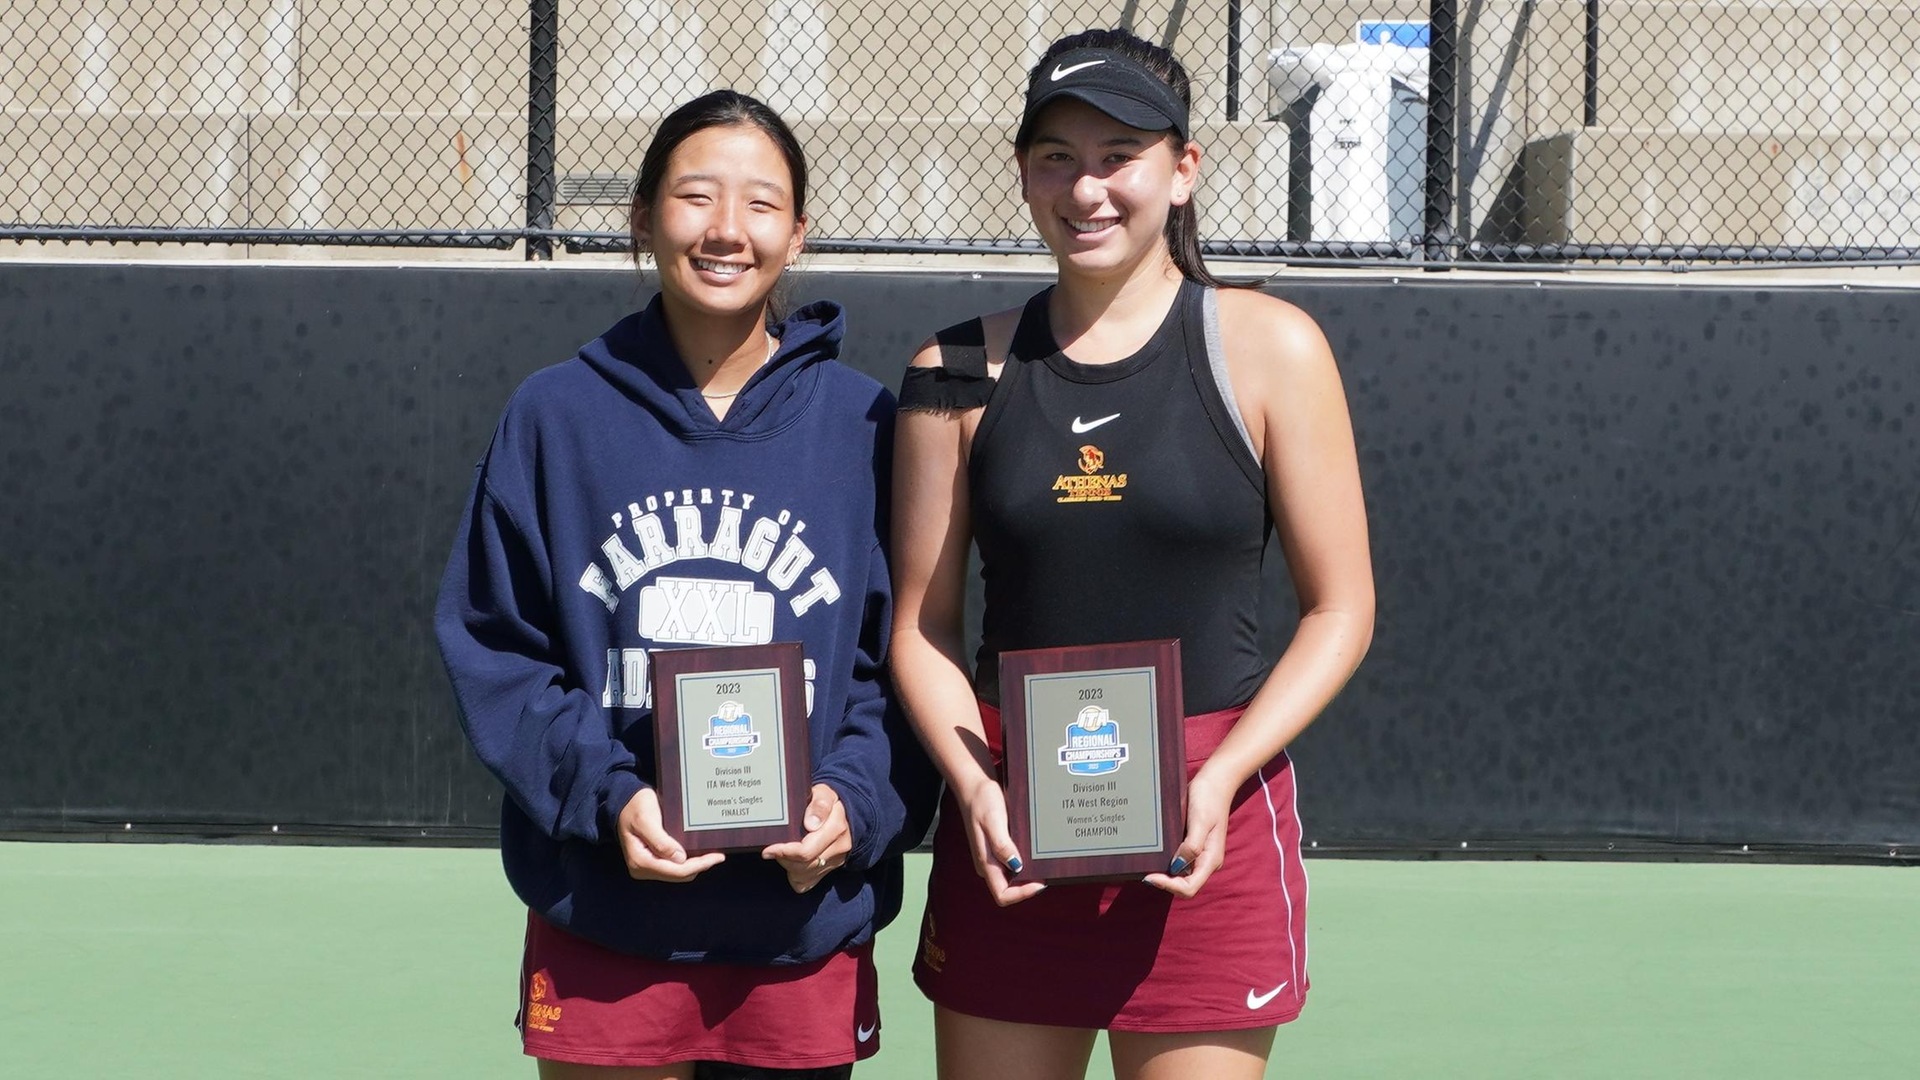 Lindsay Eisenman (right) won in three sets over Audrey Yoon